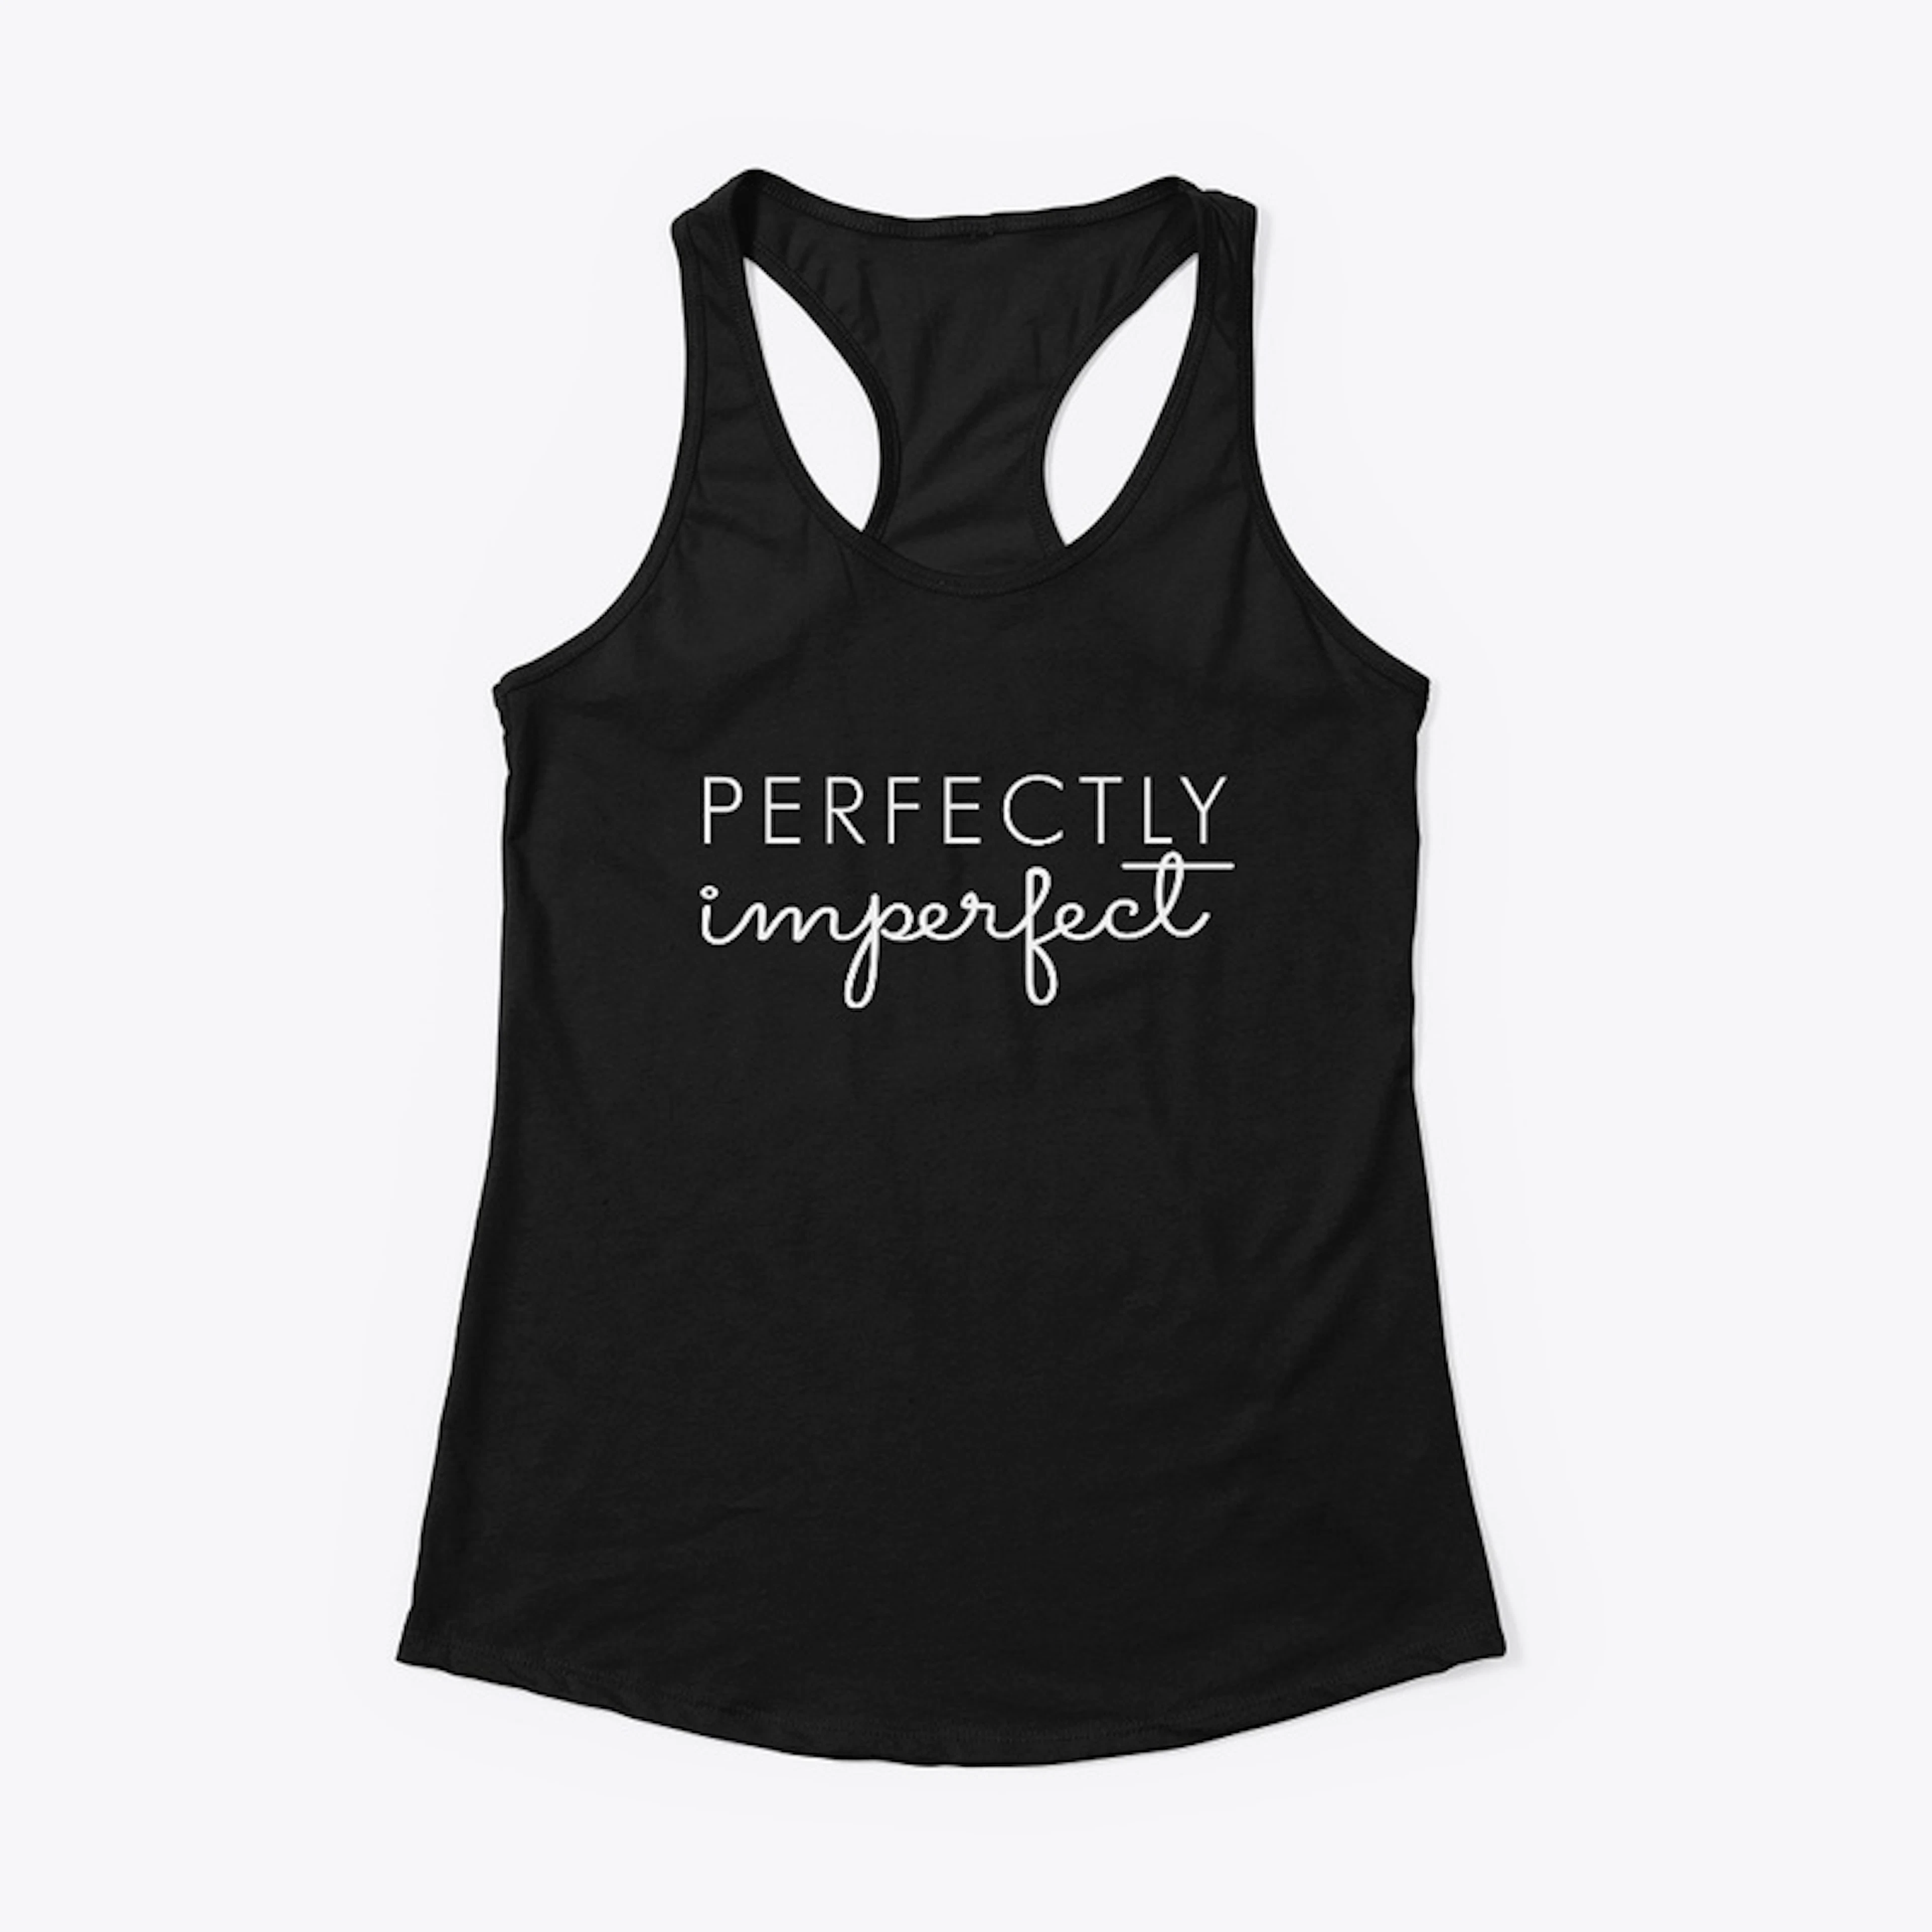 Perfectly Imperfect Yoga Top